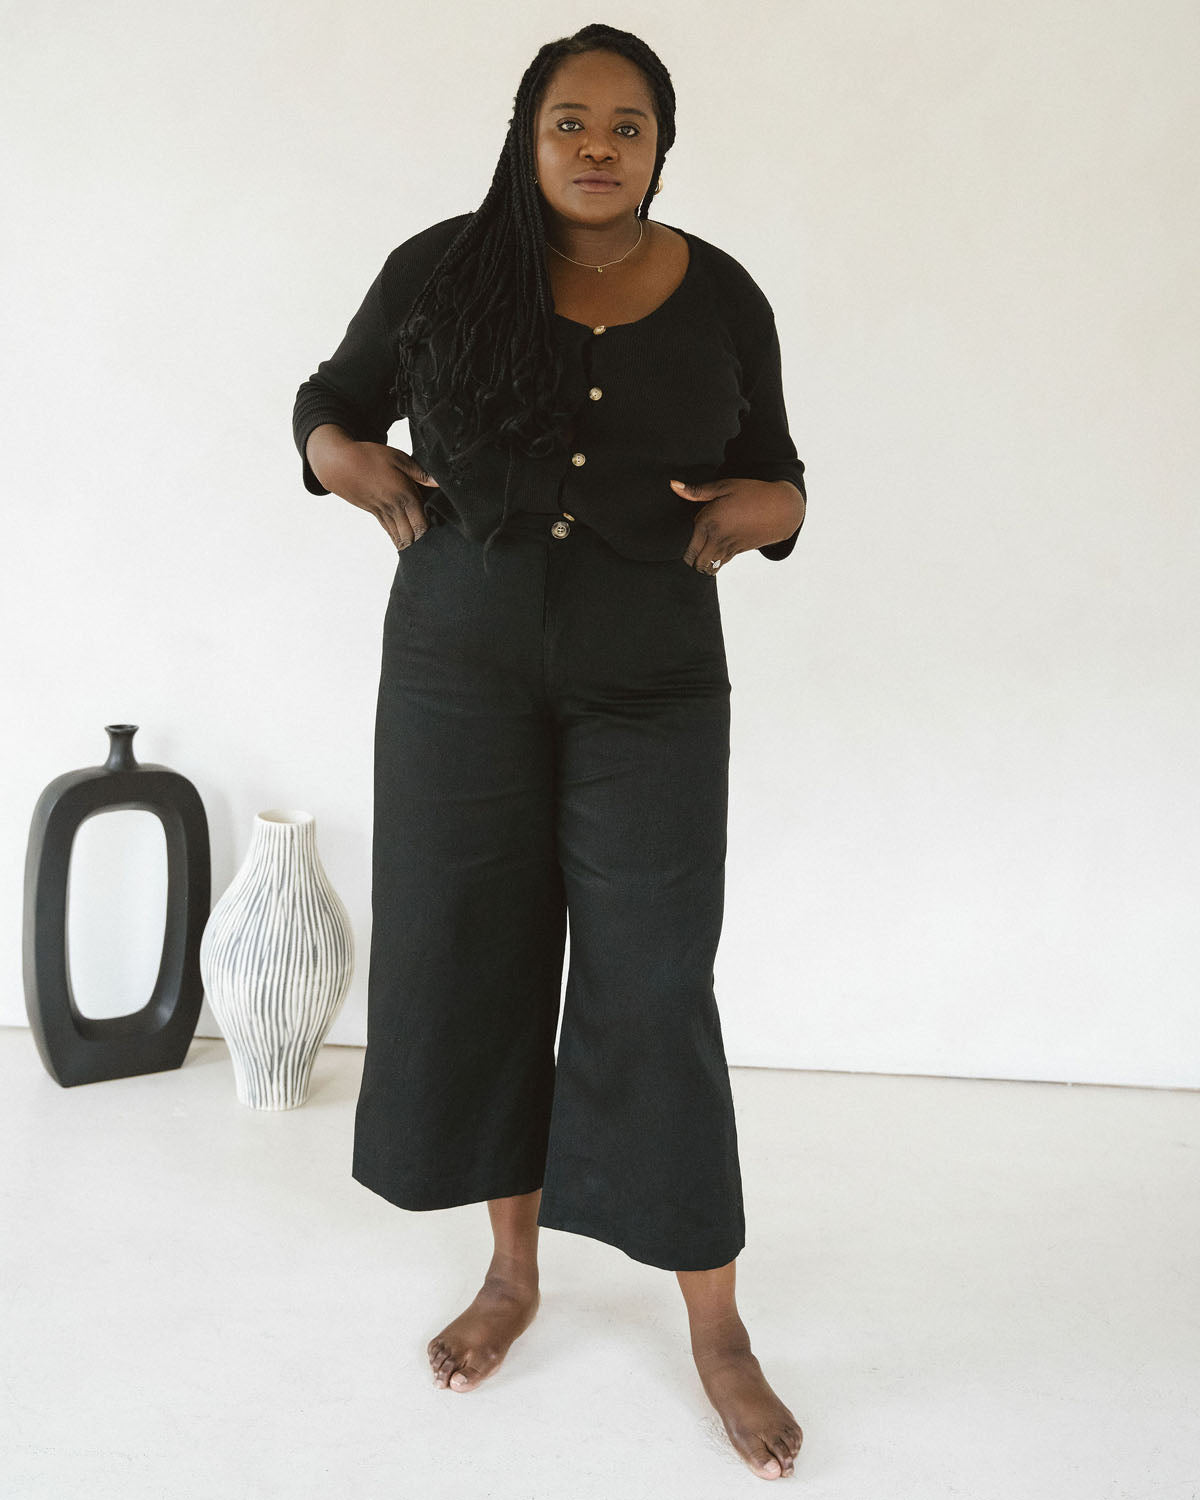 harly jae james blouse in black handmade in Vancouver with organic cotton